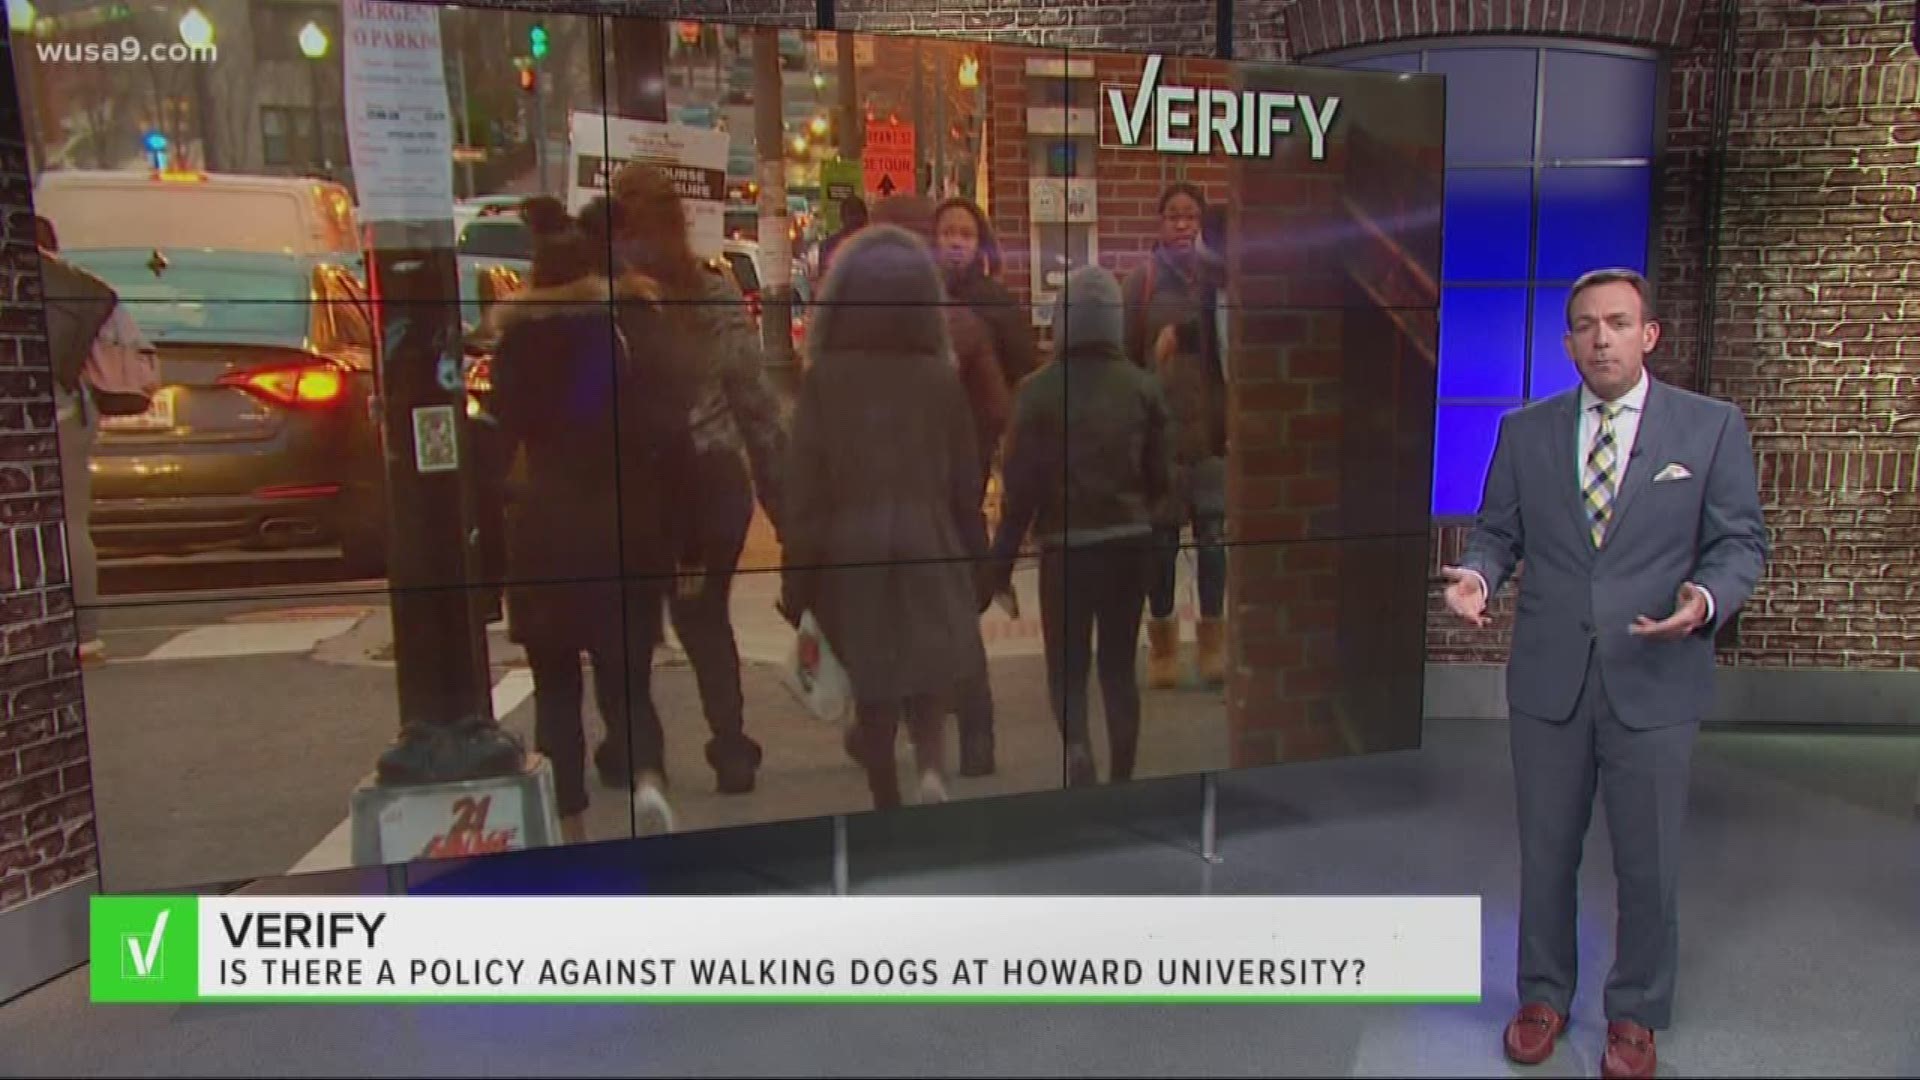 A DC woman tells US she was berated for walking her dog at Howard University. So what is the school's policy on this?